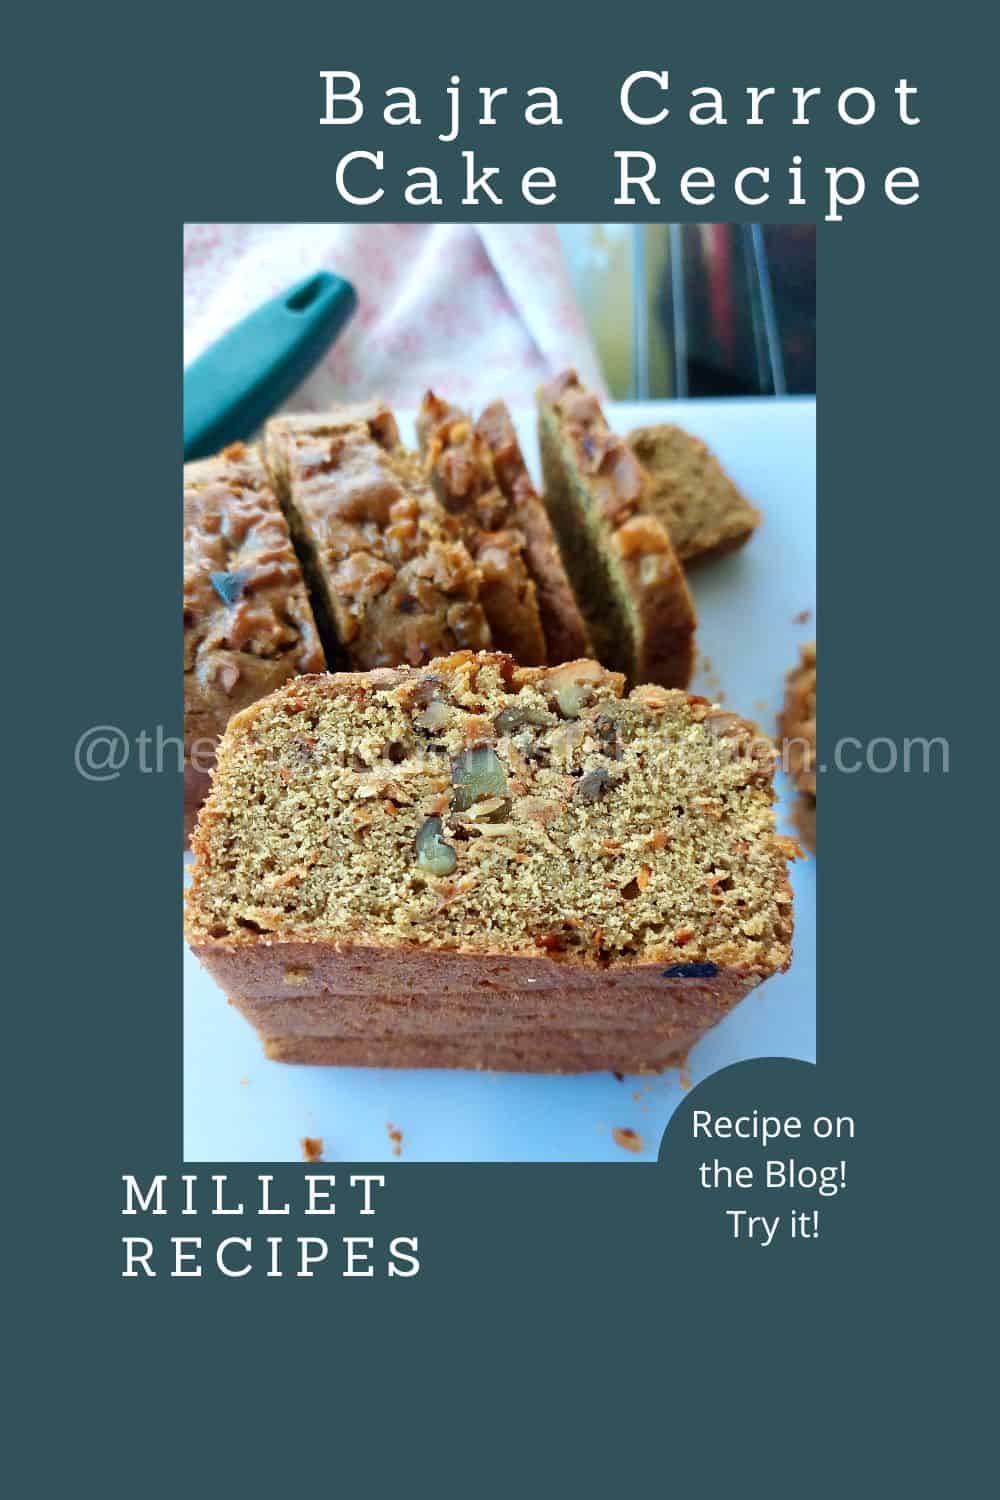 My popular carrot cake has millets in it and we enjoy it.